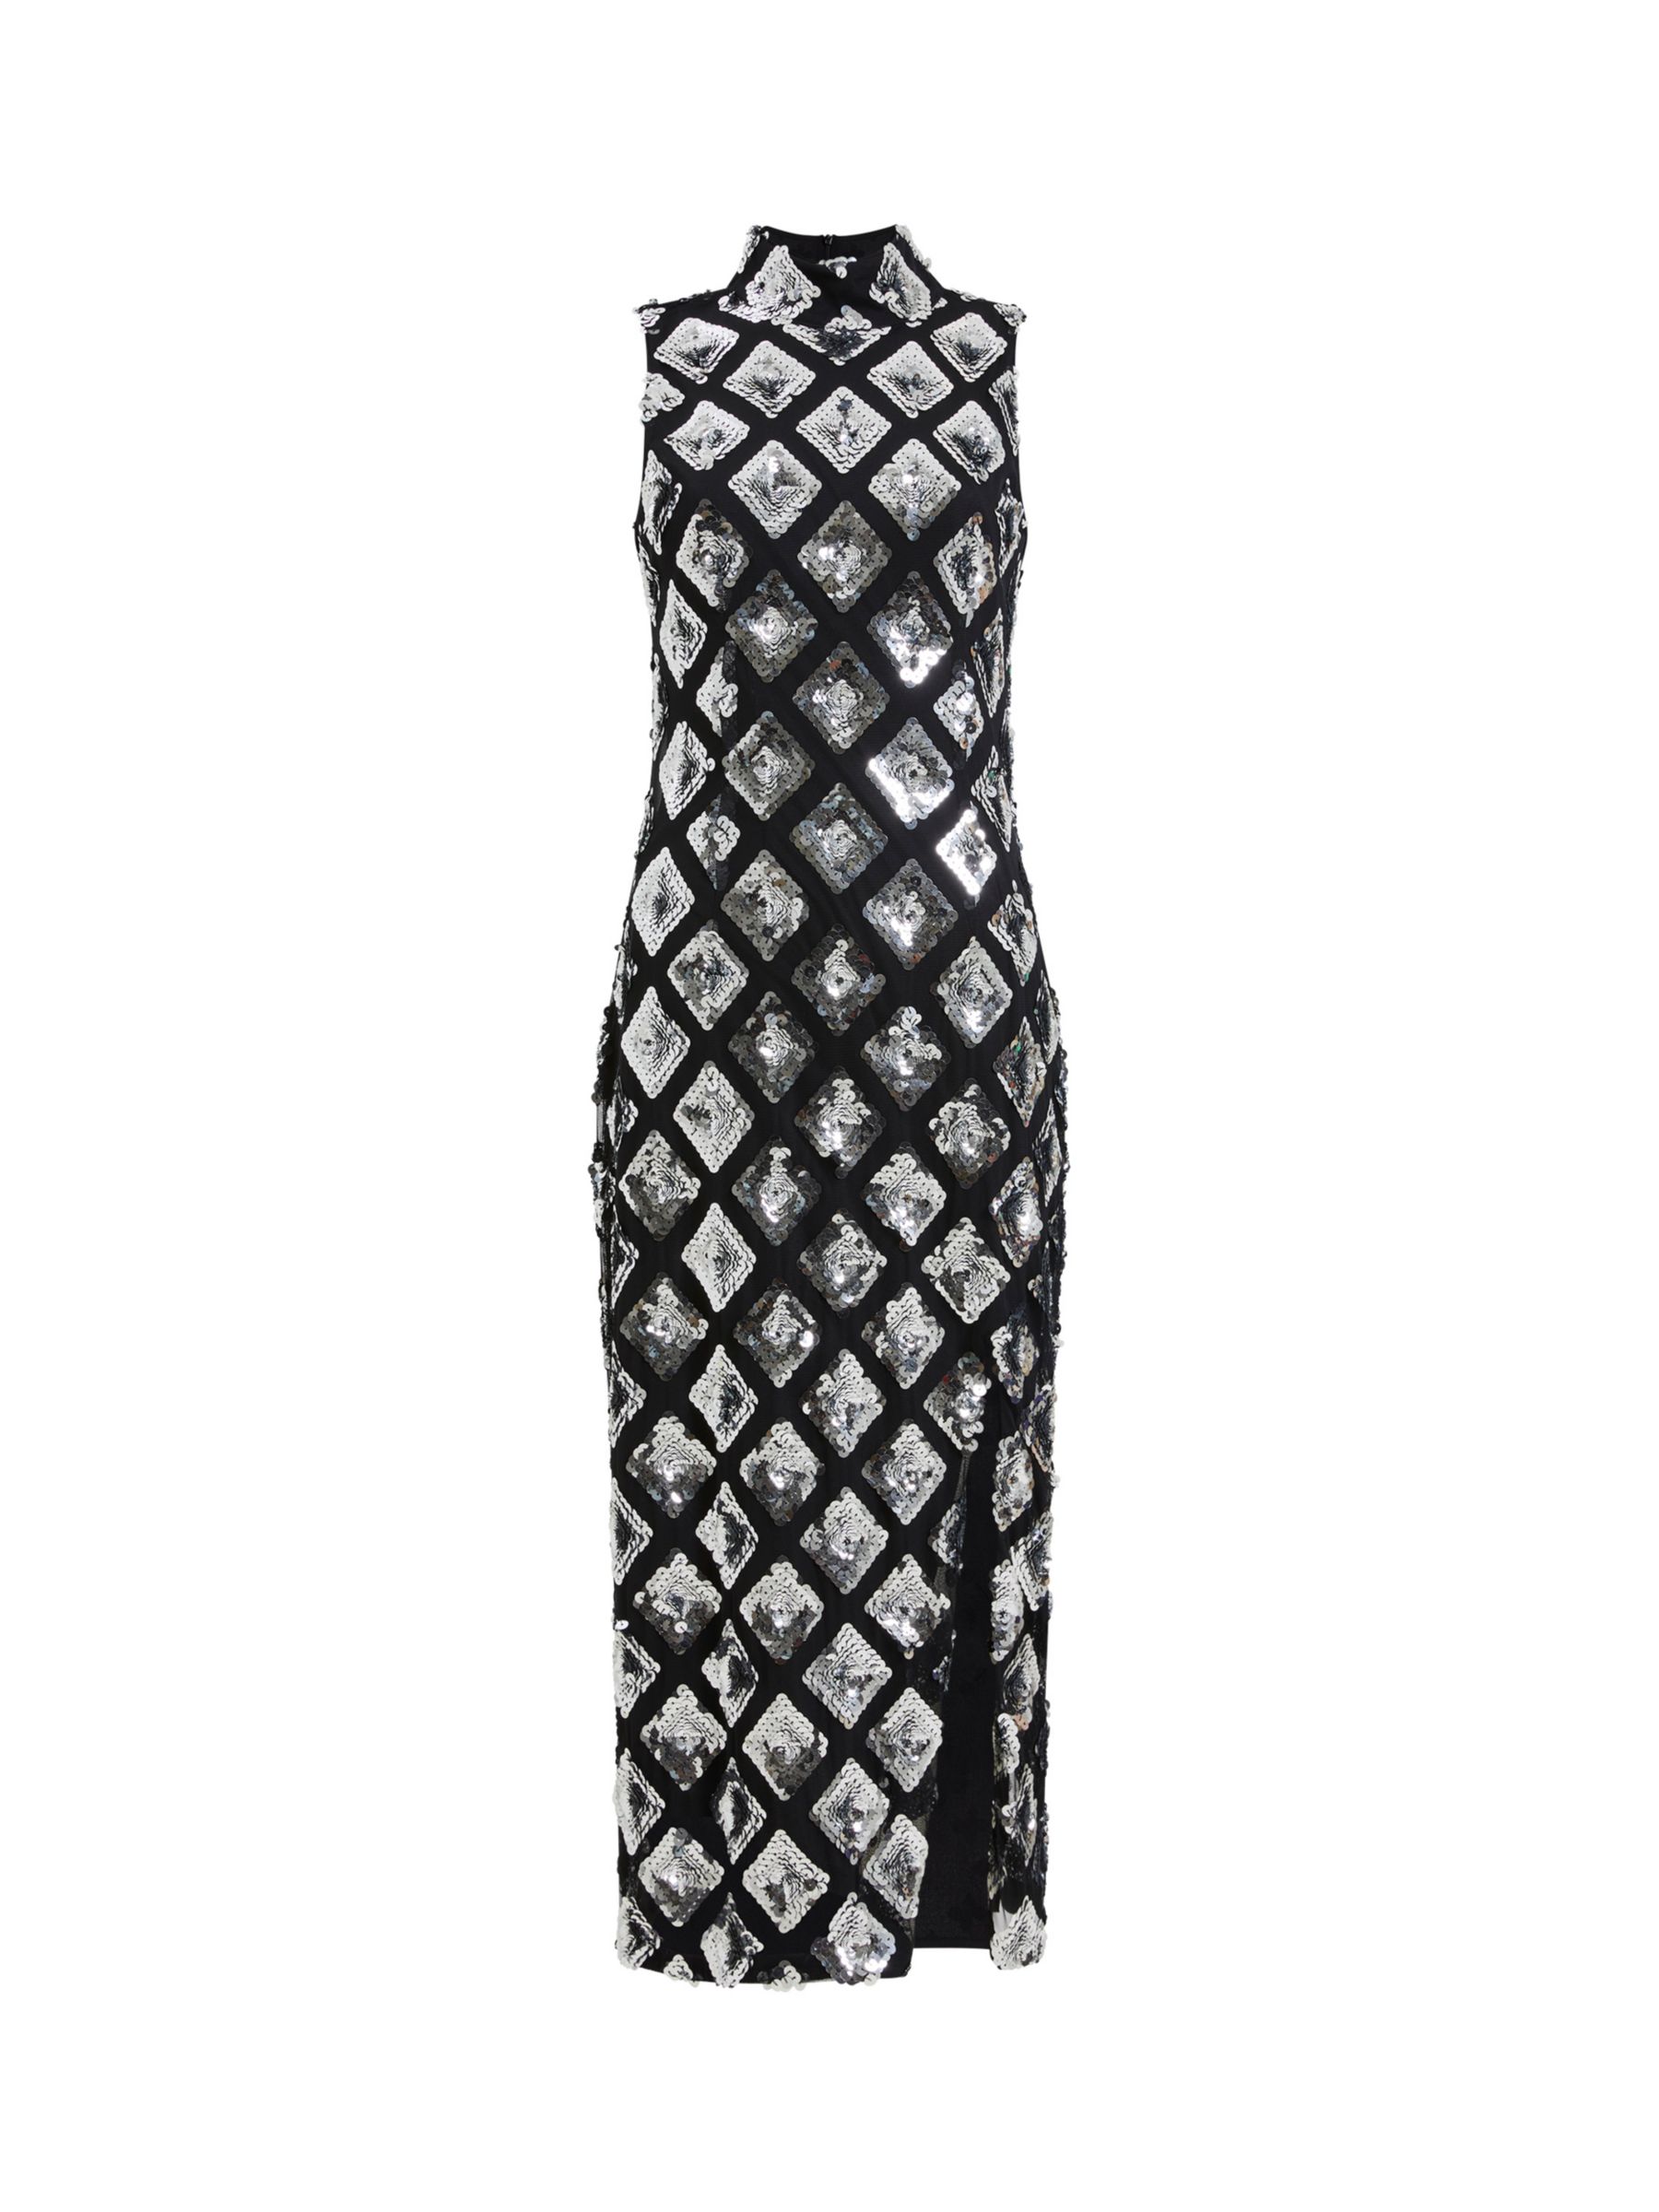 French Connection Axel Embellished Dress, Black/Silver, 14